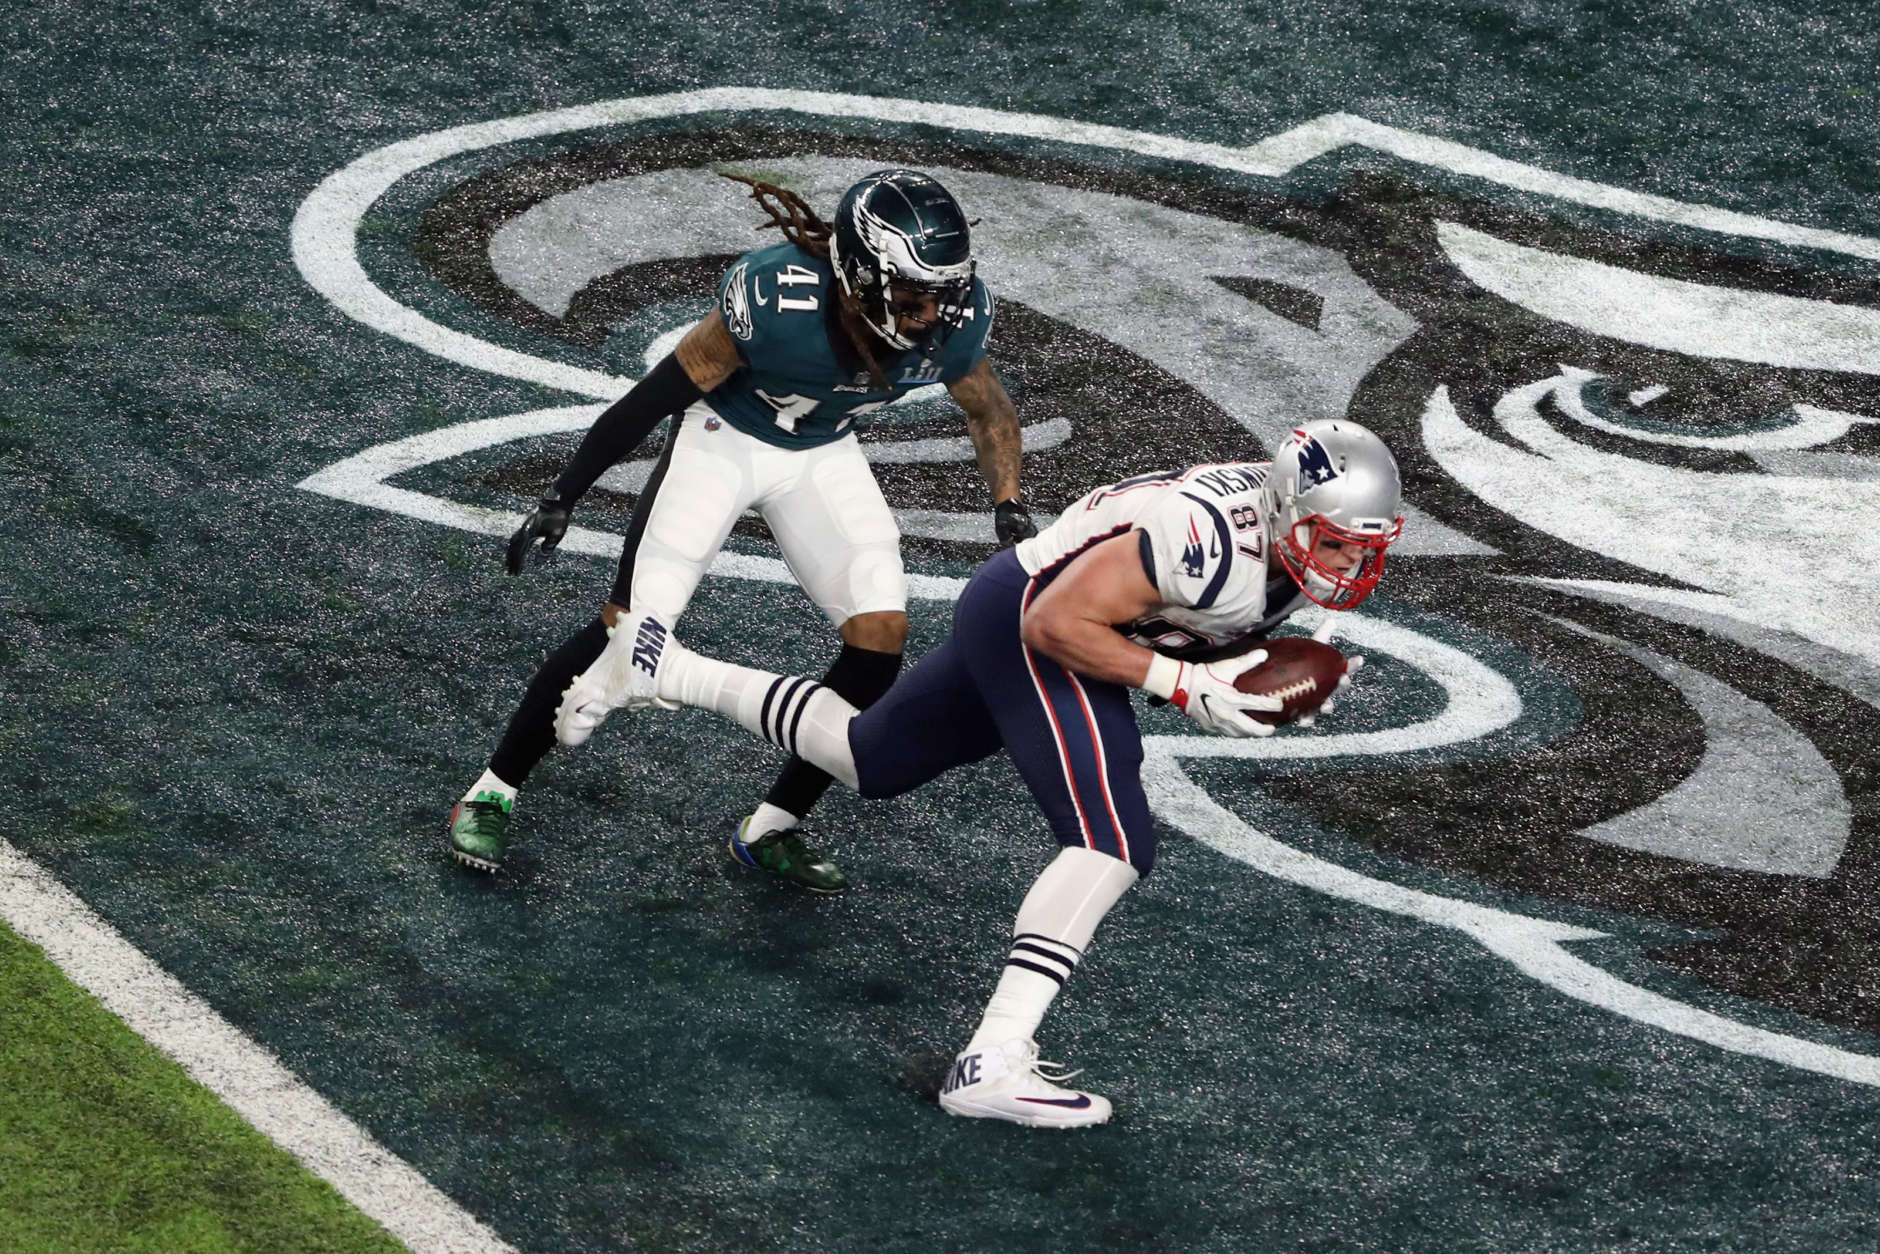 MINNEAPOLIS, MN - FEBRUARY 04: Rob Gronkowski #87 of the New England Patriots catches a 5-yard touchdown reception past Ronald Darby #41 of the Philadelphia Eagles during the third quarter in Super Bowl LII at U.S. Bank Stadium on February 4, 2018 in Minneapolis, Minnesota.  (Photo by Christian Petersen/Getty Images)